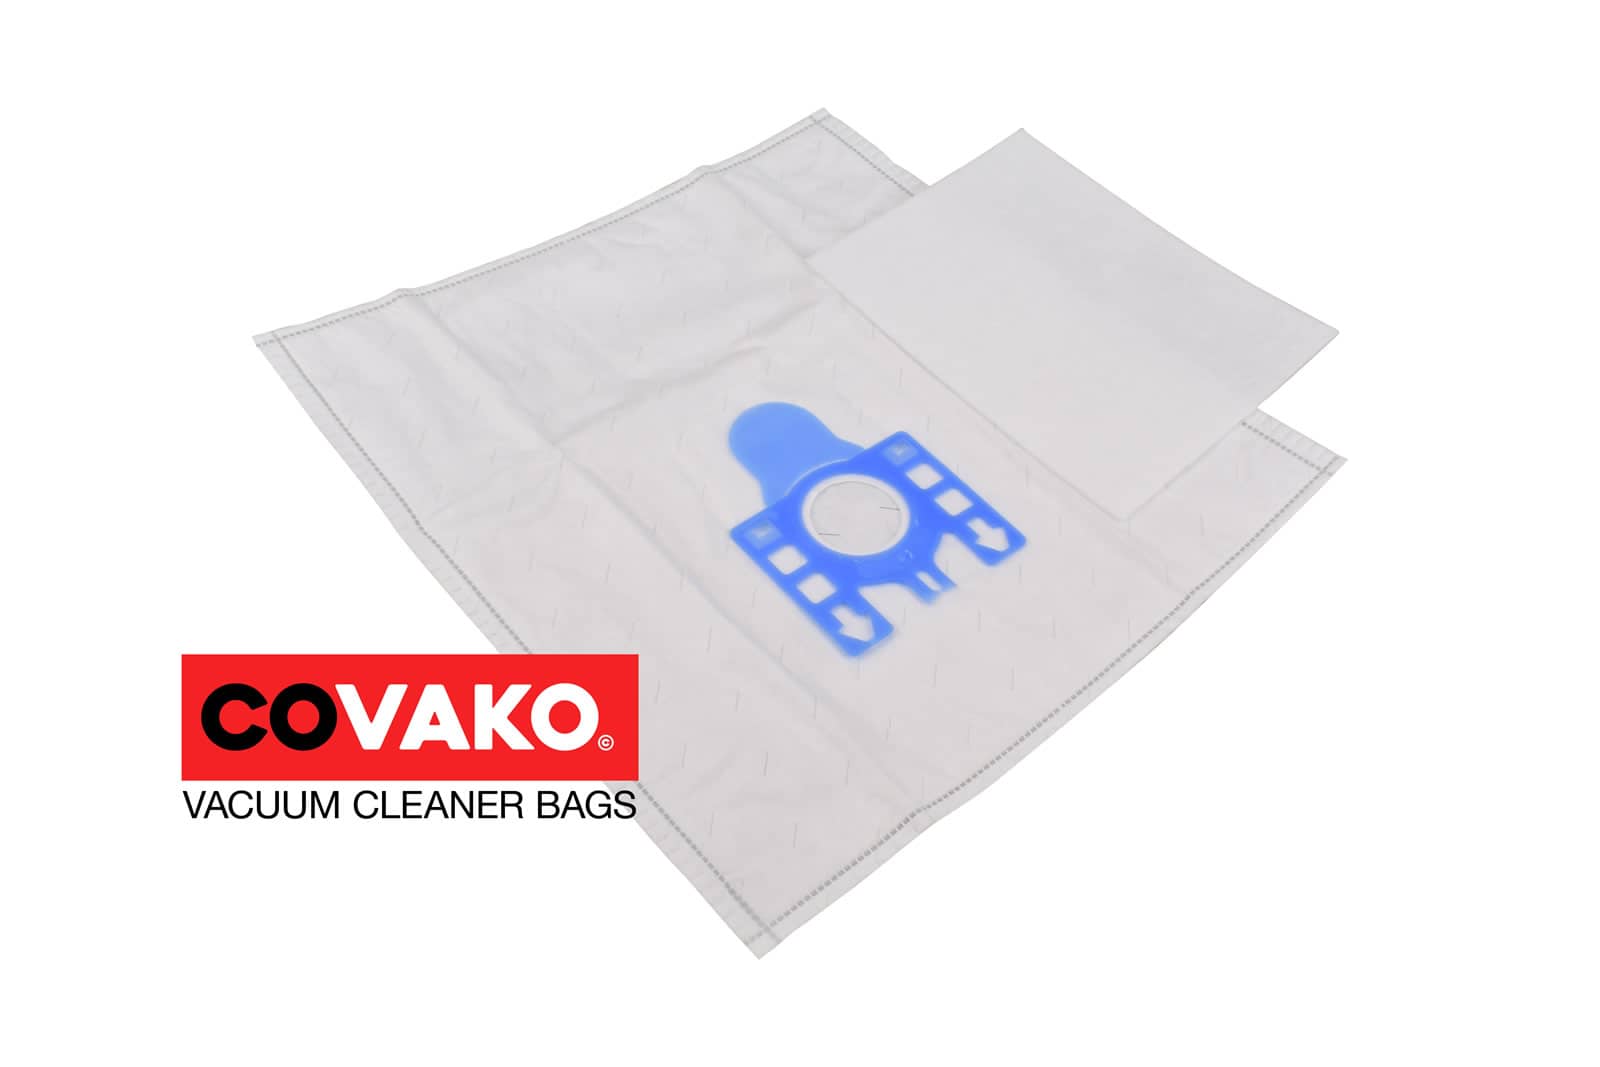 Electrolux CE 1700.0-1-Vampyr / Synthesis - Electrolux vacuum cleaner bags